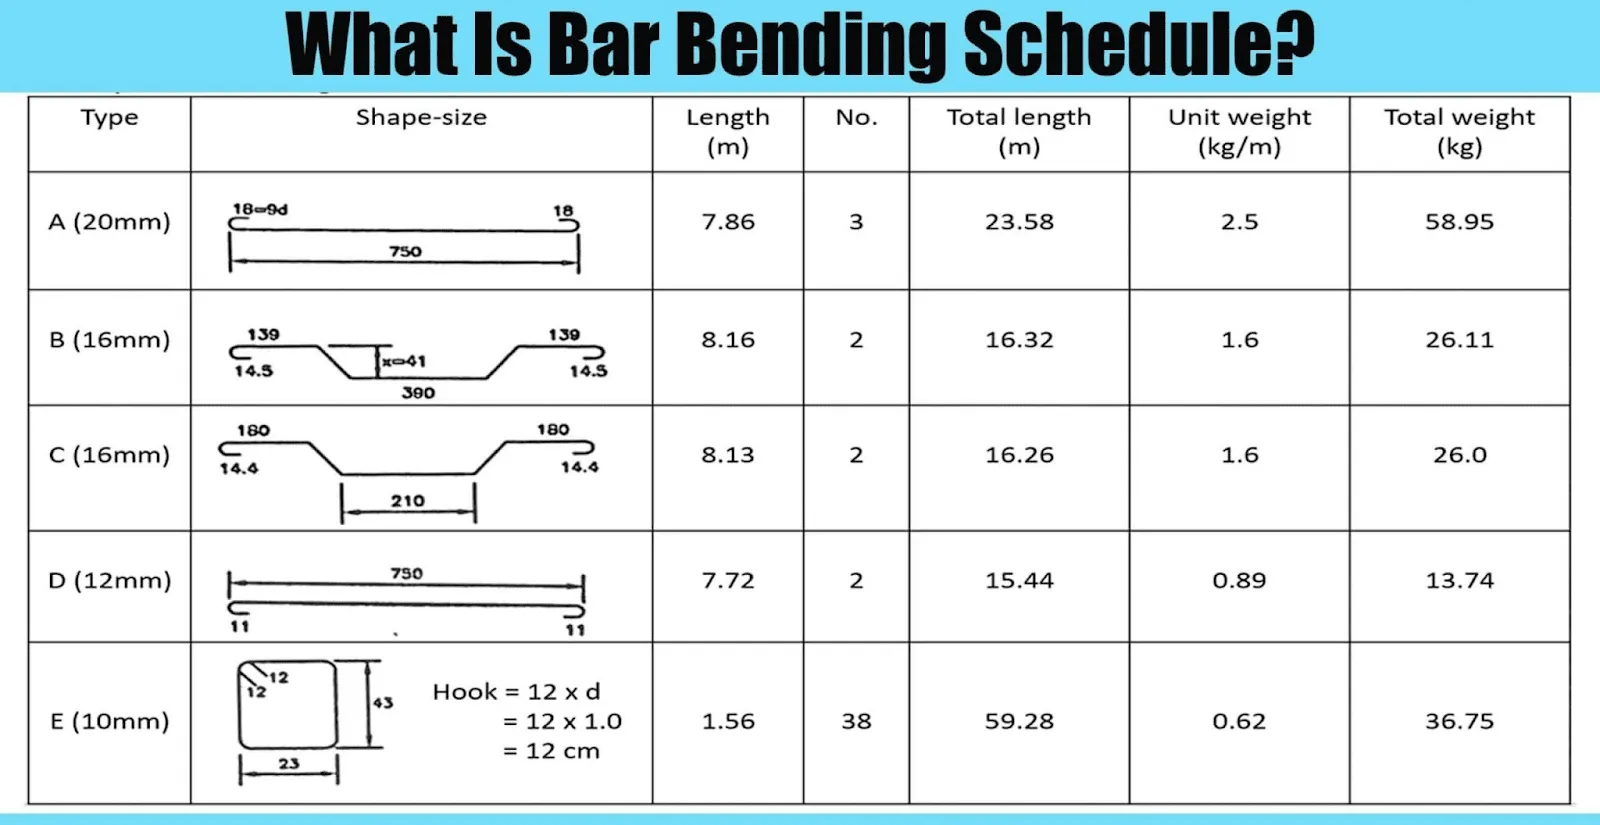 What is the bar bending schedule